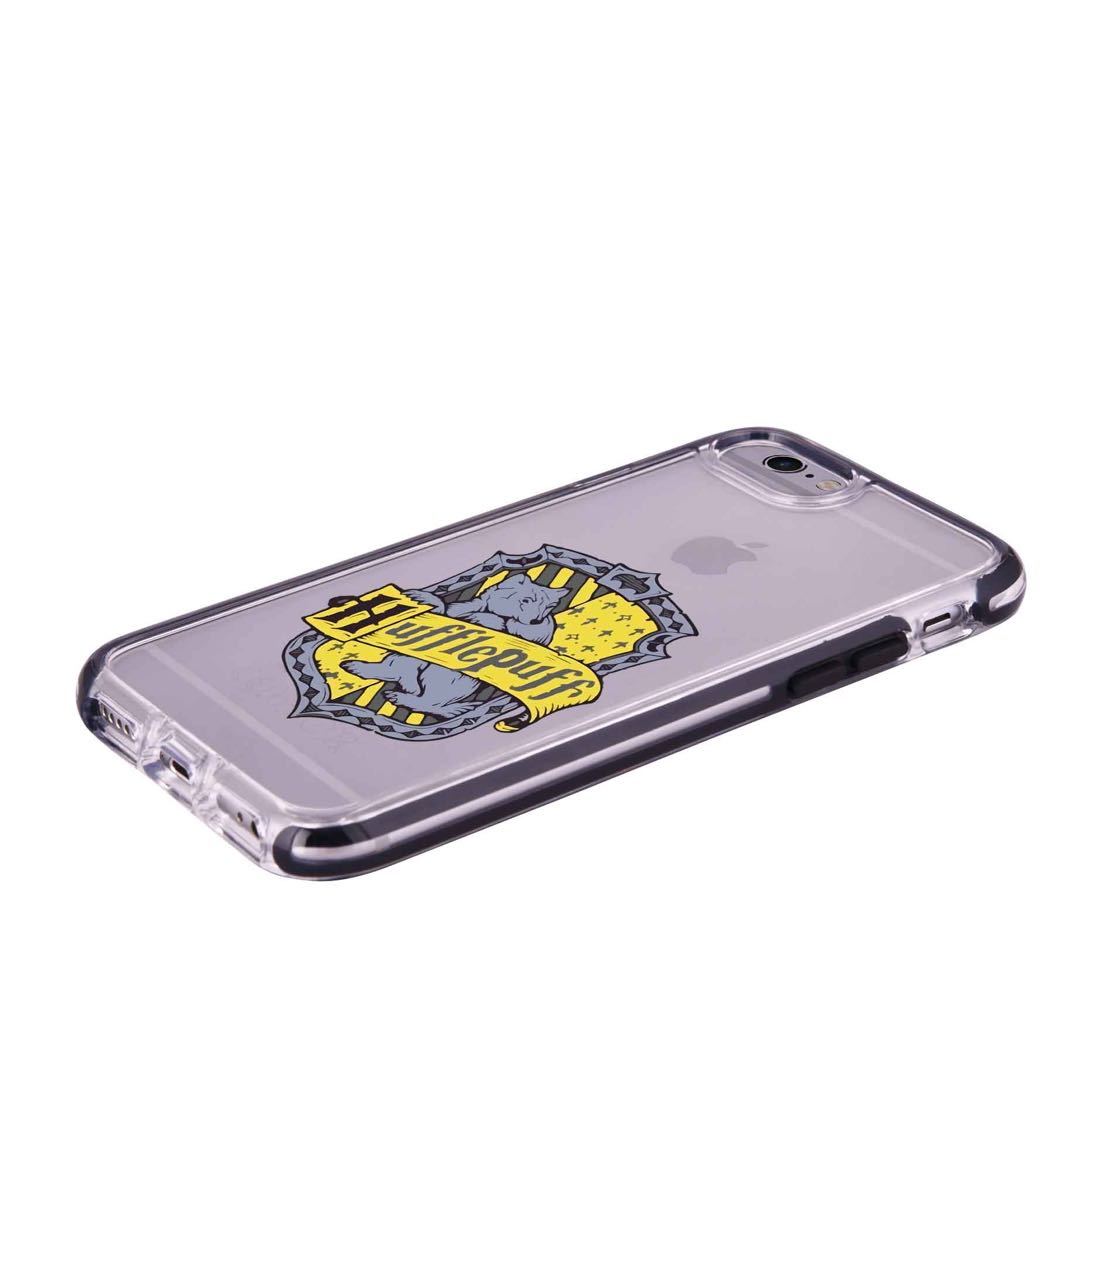 Crest Hufflepuff - Extreme Phone Case for iPhone 6S Plus